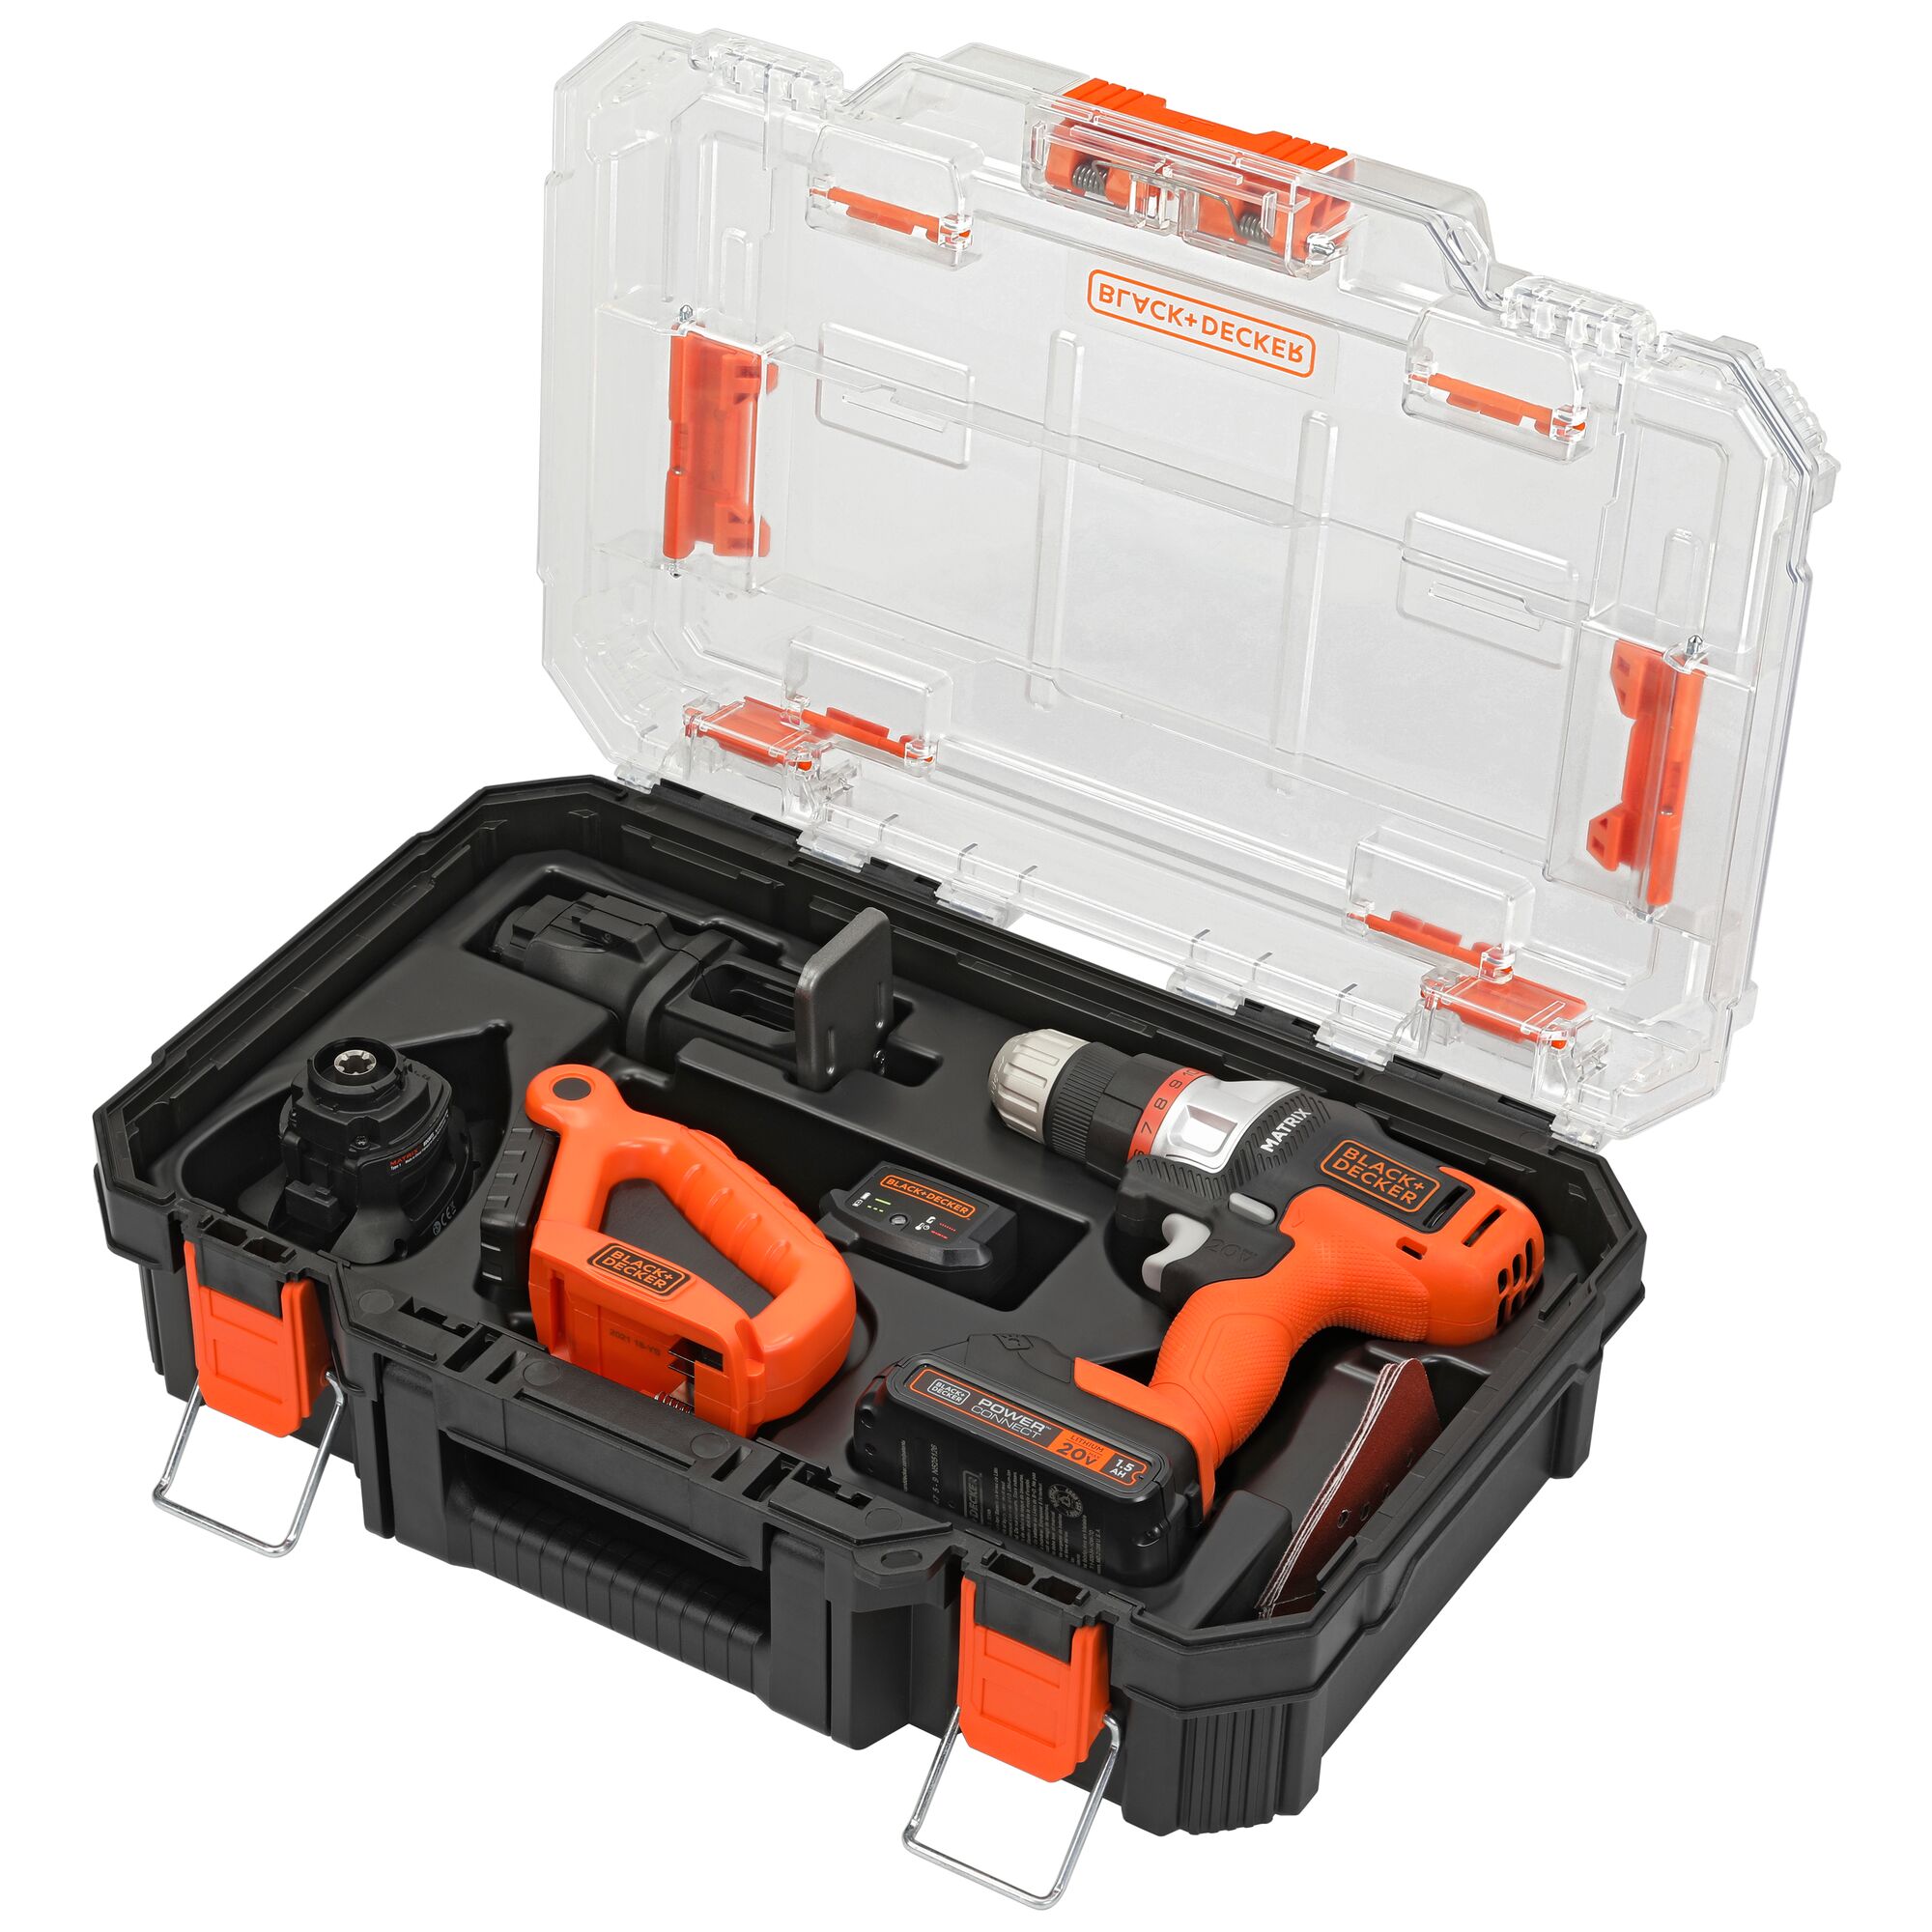 BLACK+DECKER 4-Tool Power Tool Combo Kit with Hard Case (1-Battery